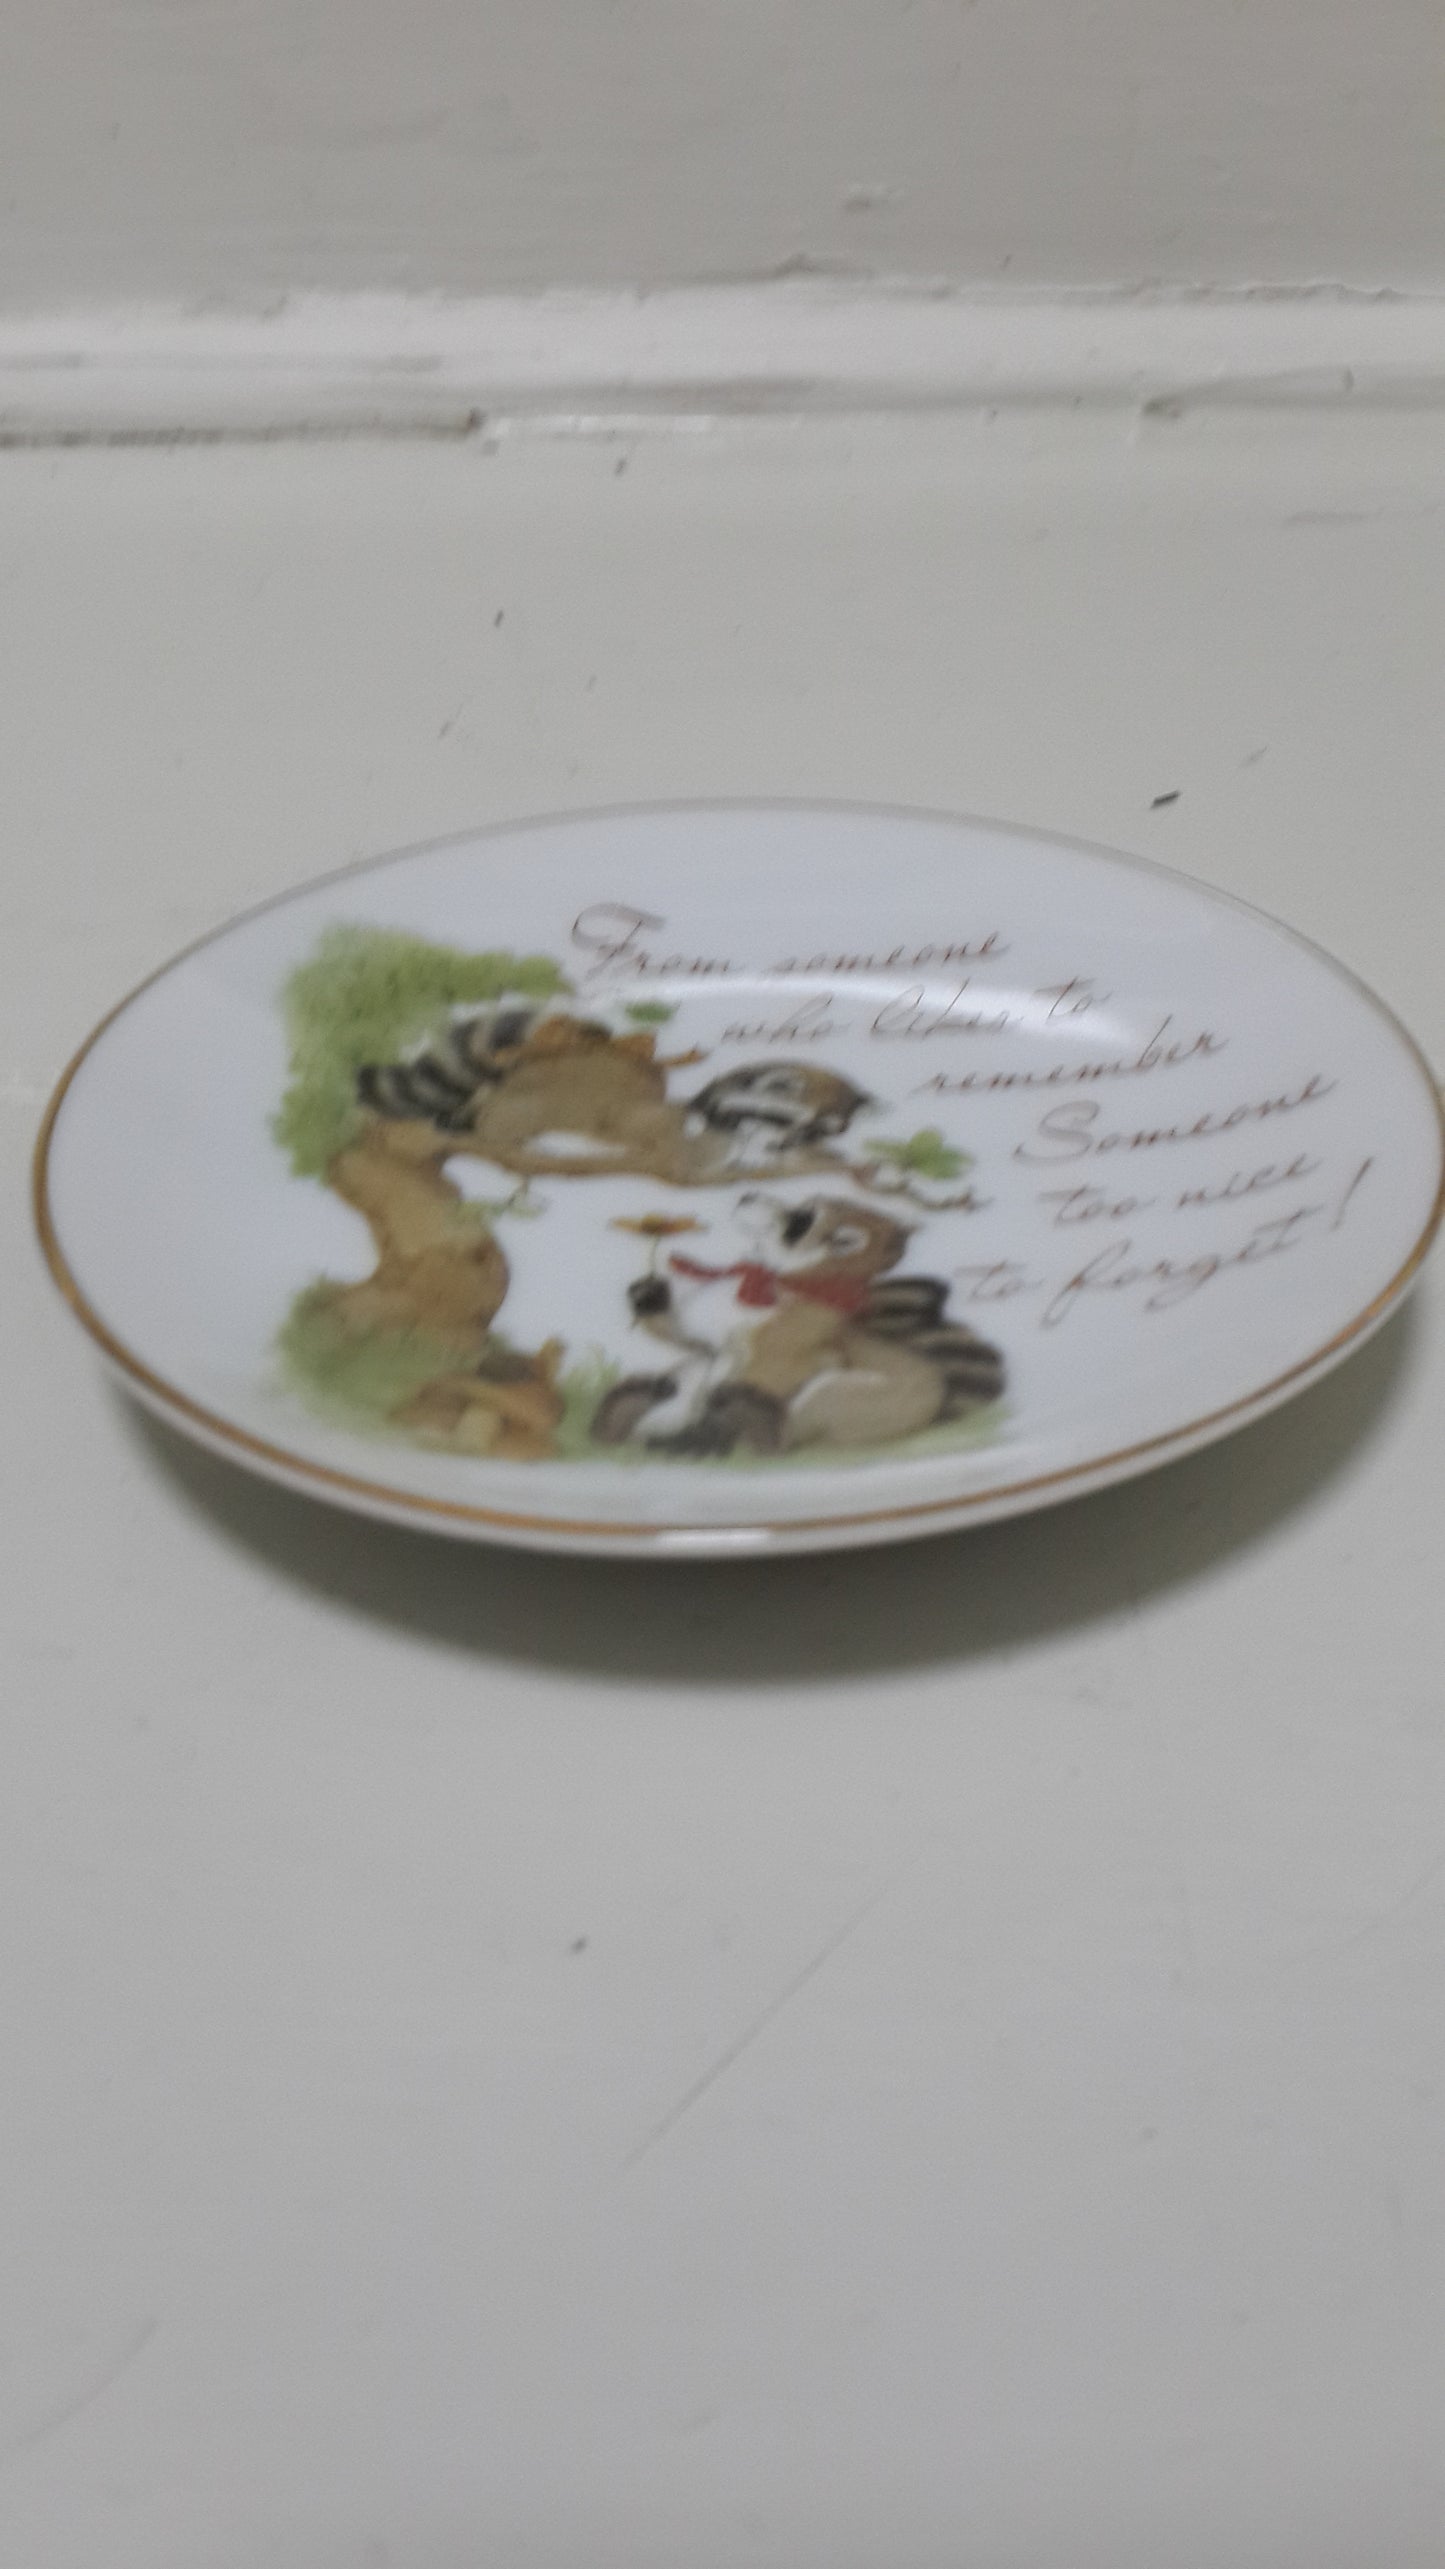 Lasting Treasures Plate "From Someone"